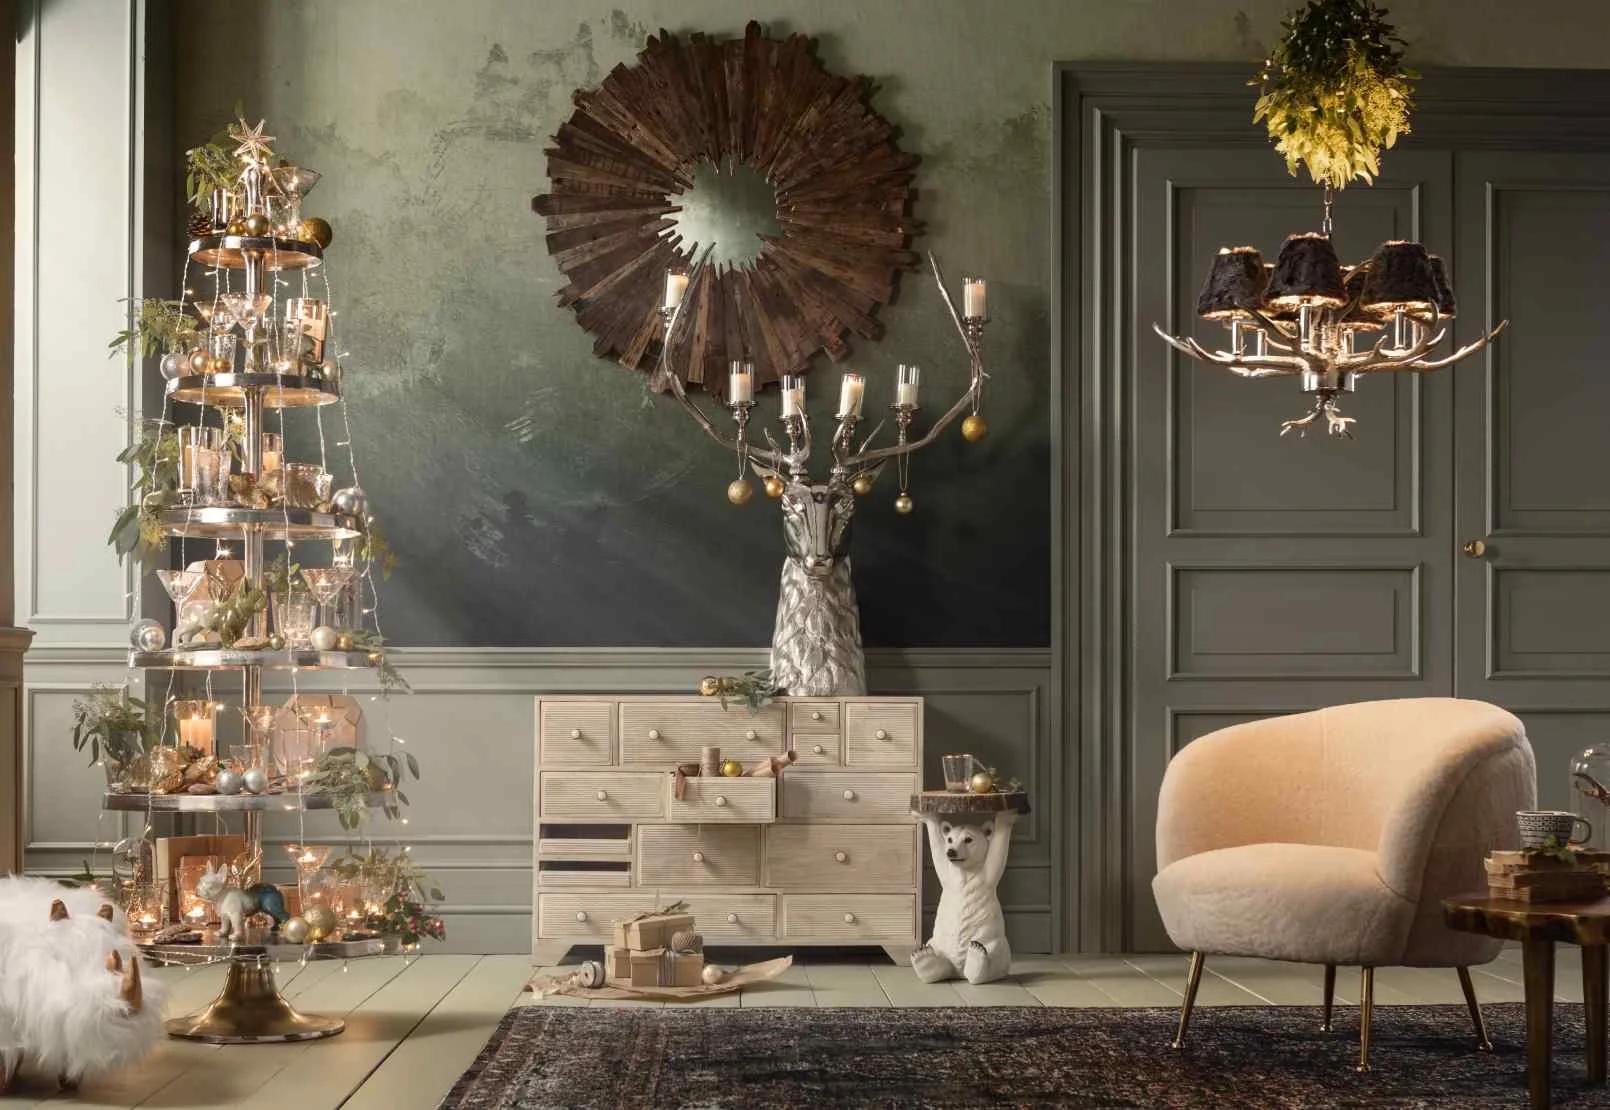 Festive Décor Ideas To Transform Any Dining Space